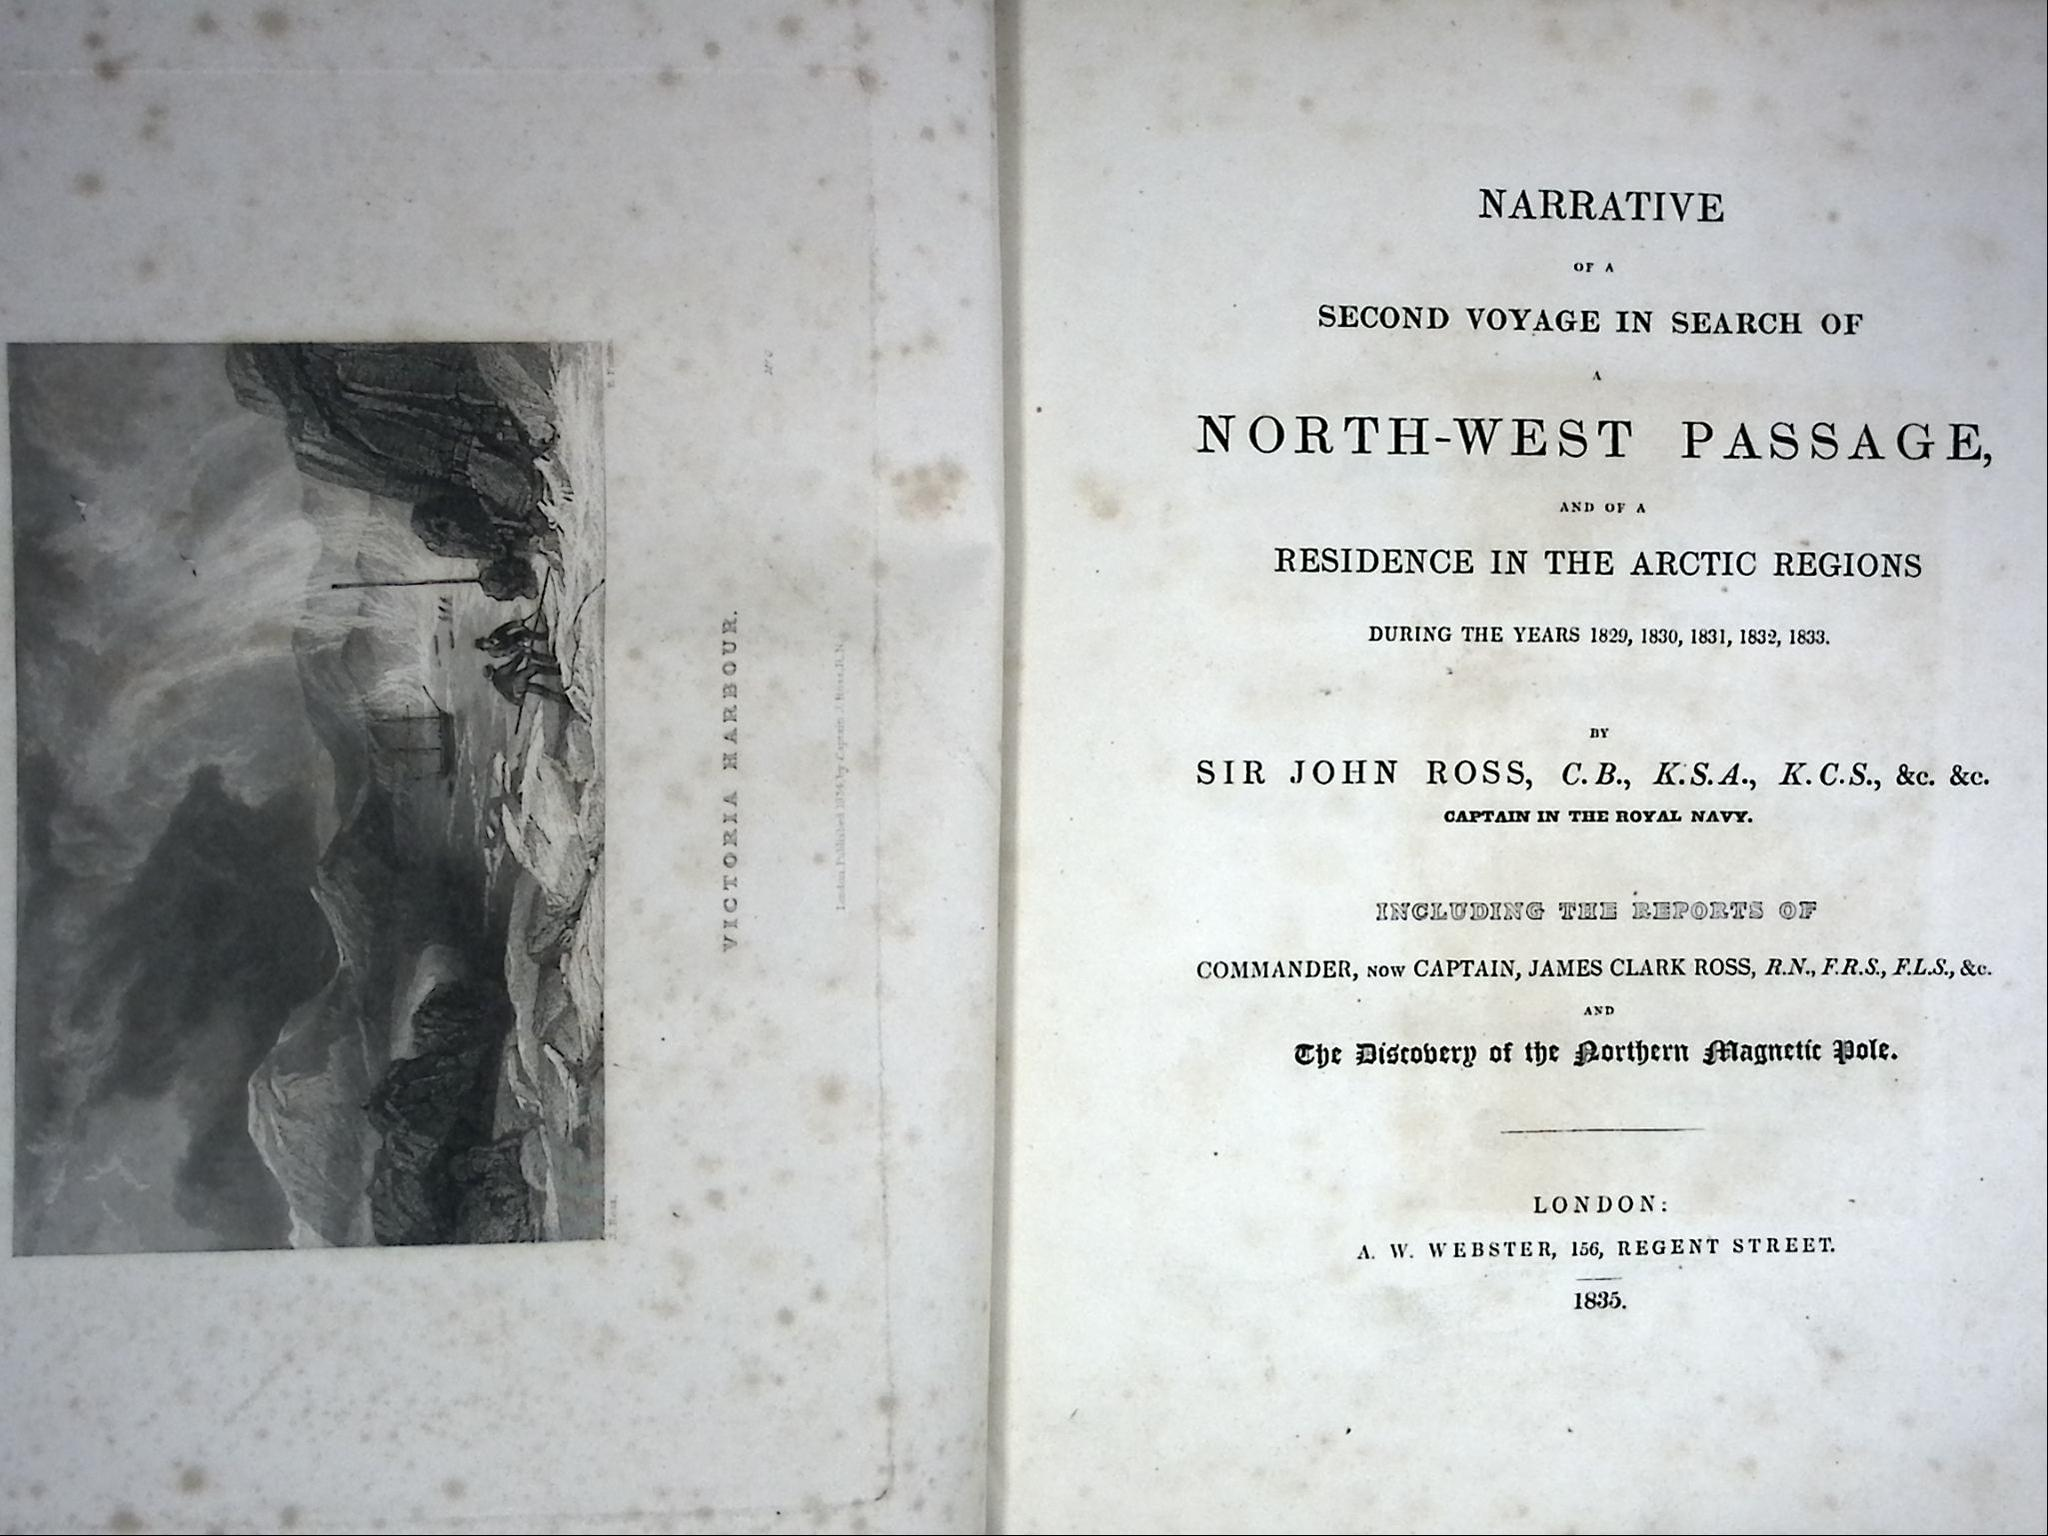 Narrative of a Second Voyage in Search of a North-West Passage and of a Residence in the Arctic Regions During the Years 1829 1830 1831 1832 1833 ...